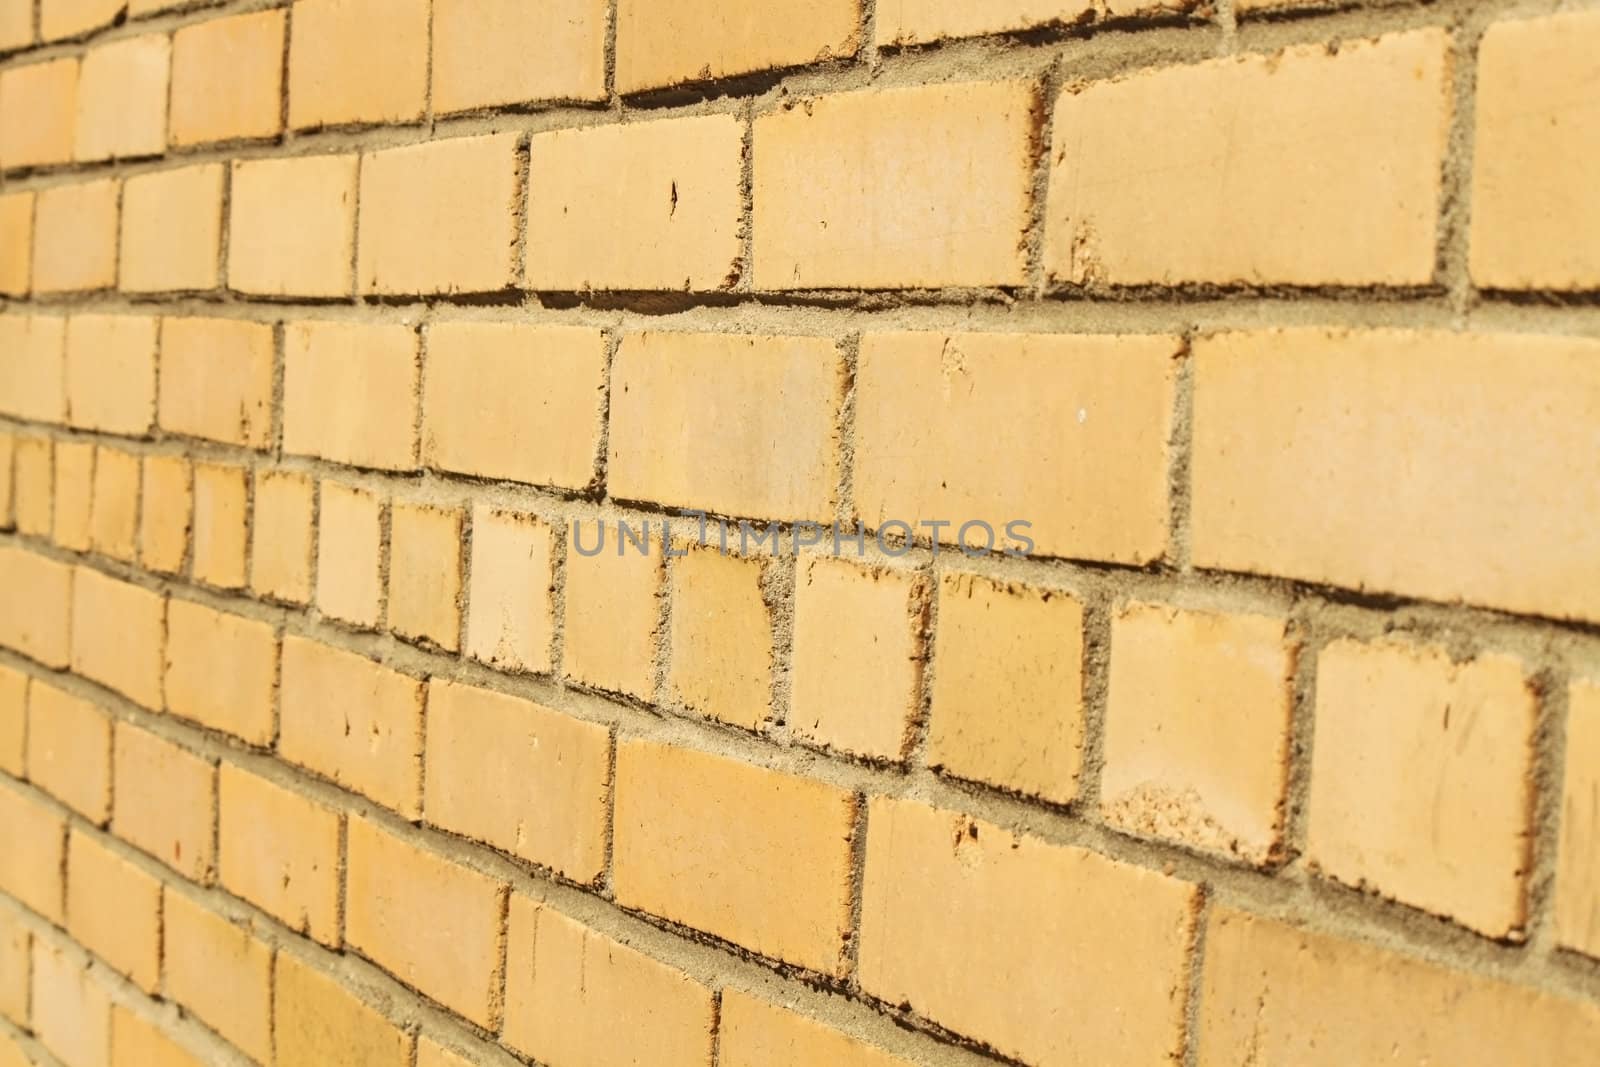 Just yellow brick wall, nothing else